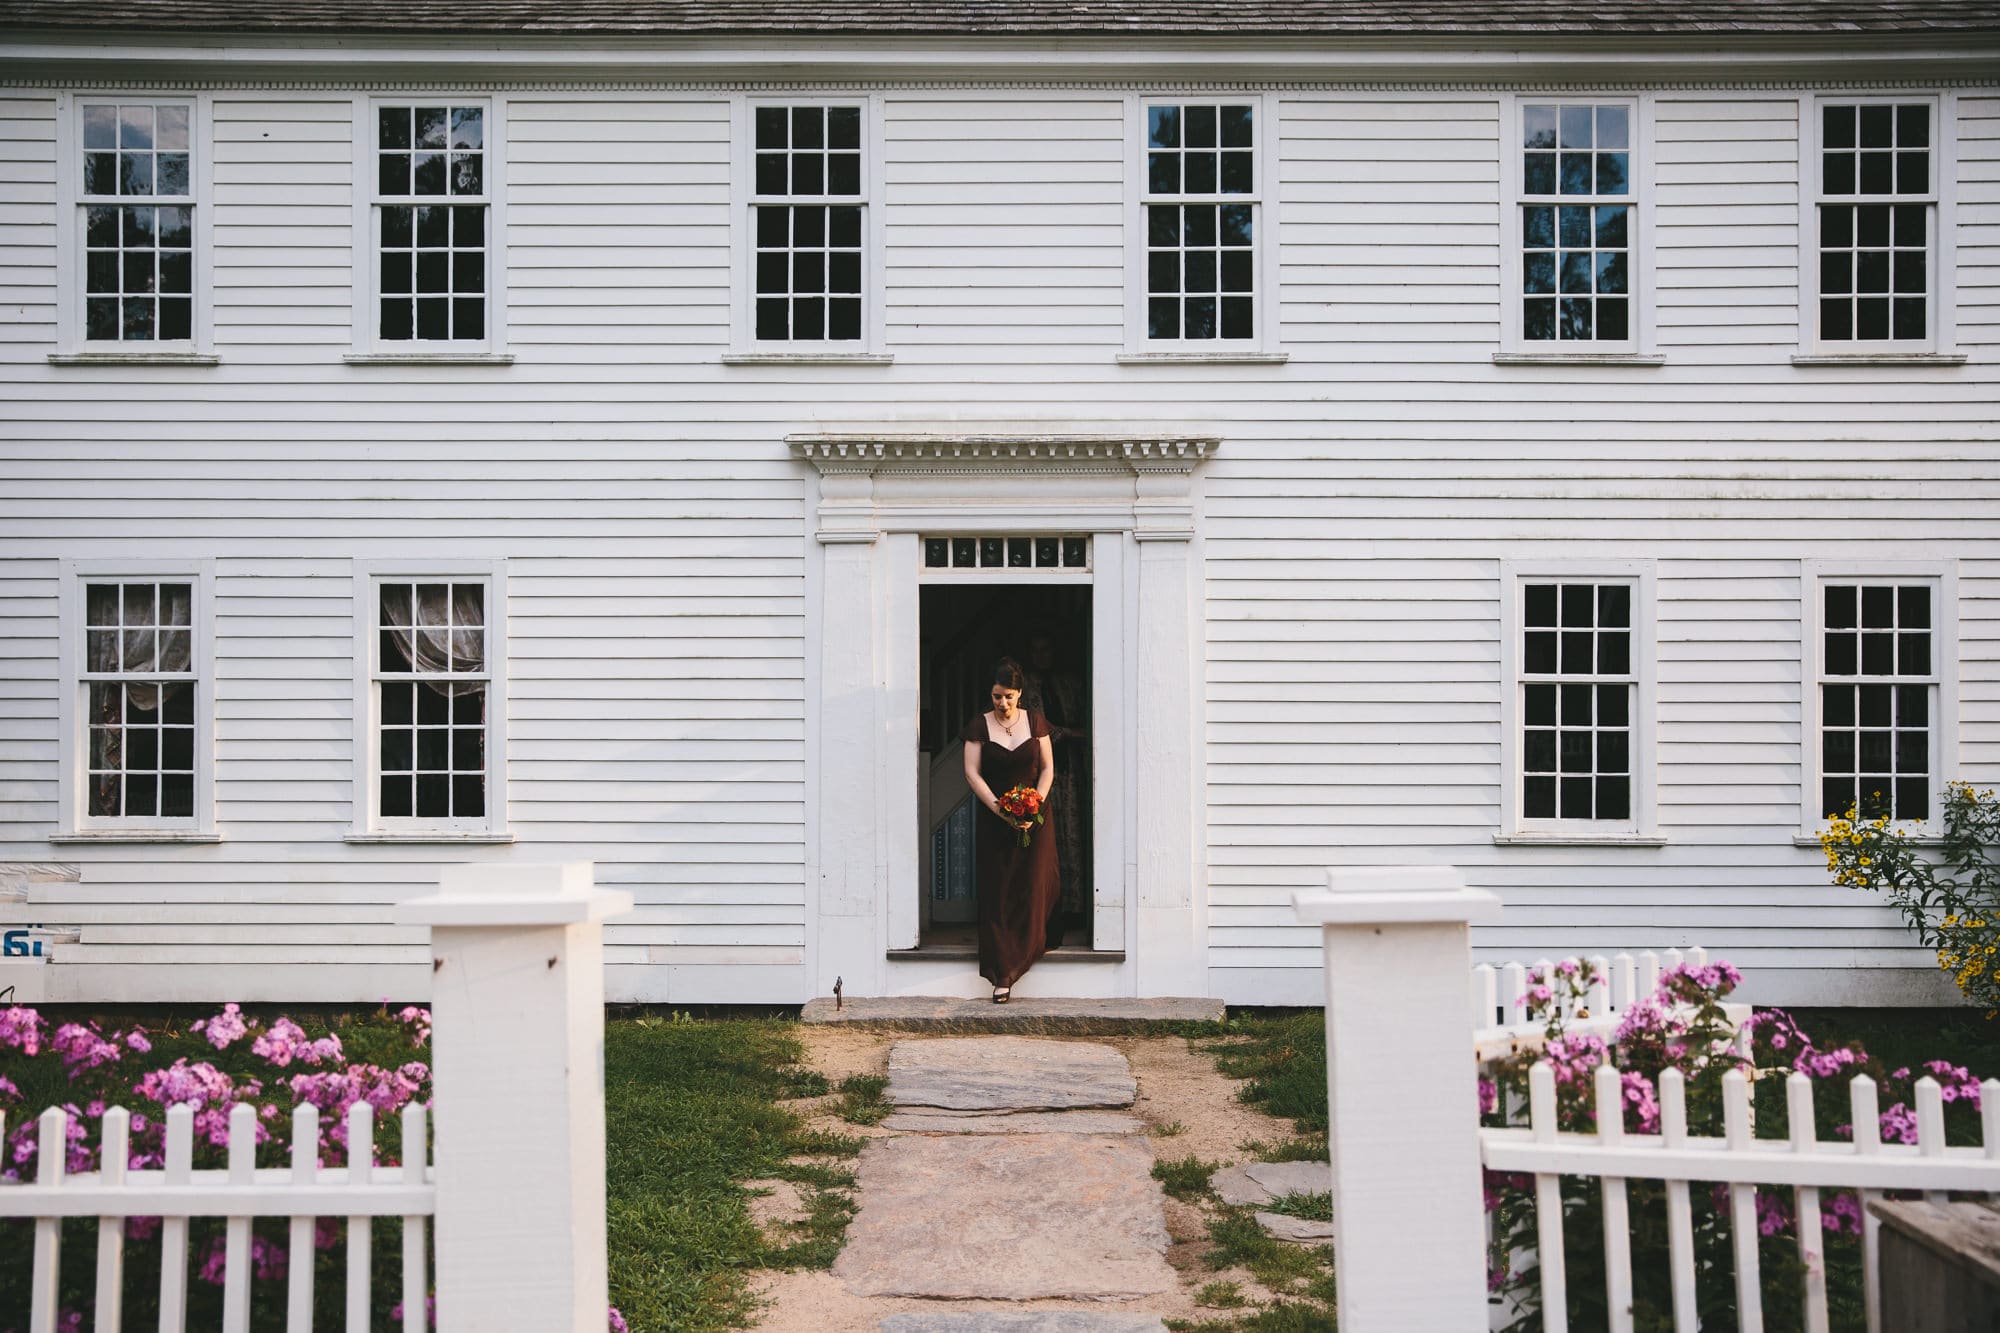 This documentary photograph of a bridesmaid walking out of the house is one of the best wedding photographs of 2016